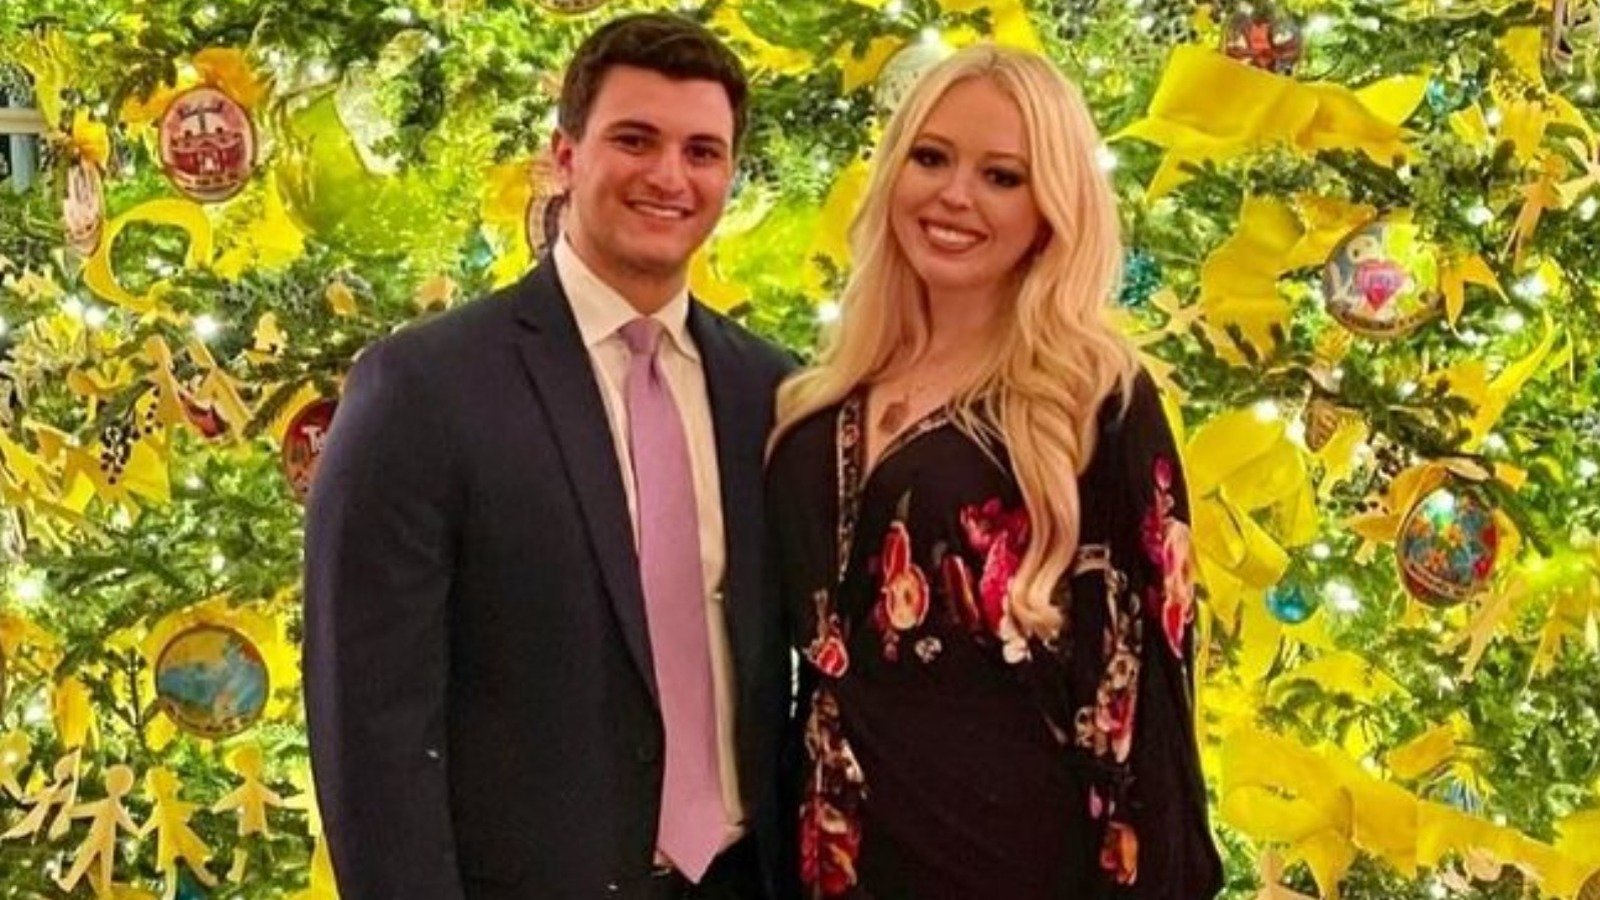 The Truth About Tiffany Trump And Michael Boulos' Relationship - The List